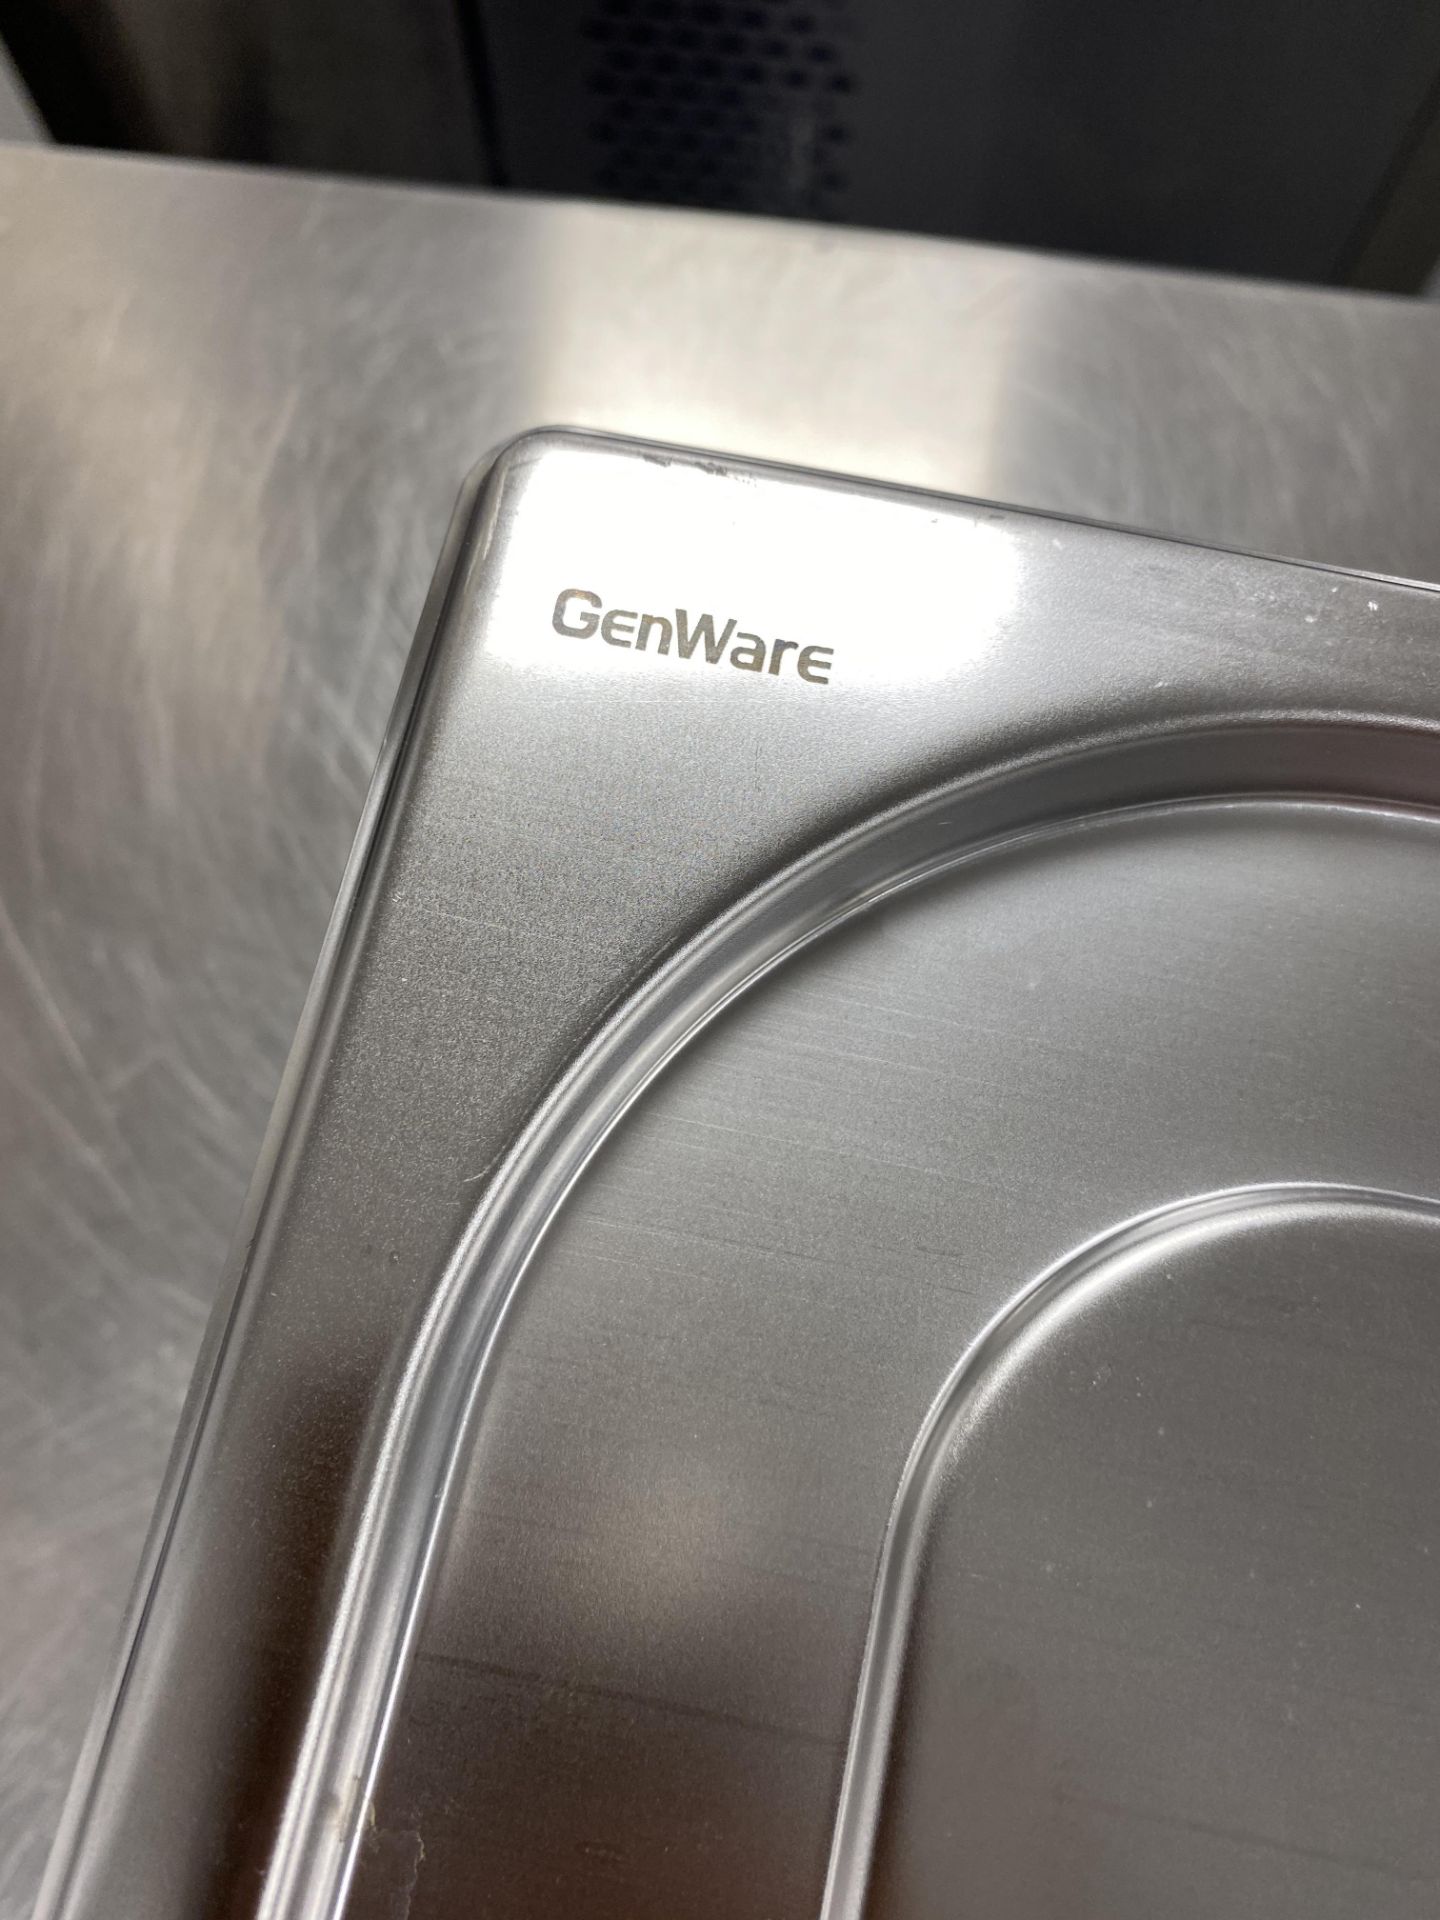 5: Genware Stainless Steel Gastronorm Pans, 5.8 Litre Capacity, Size - 1/1 40mm, with Lids - Current - Image 3 of 5